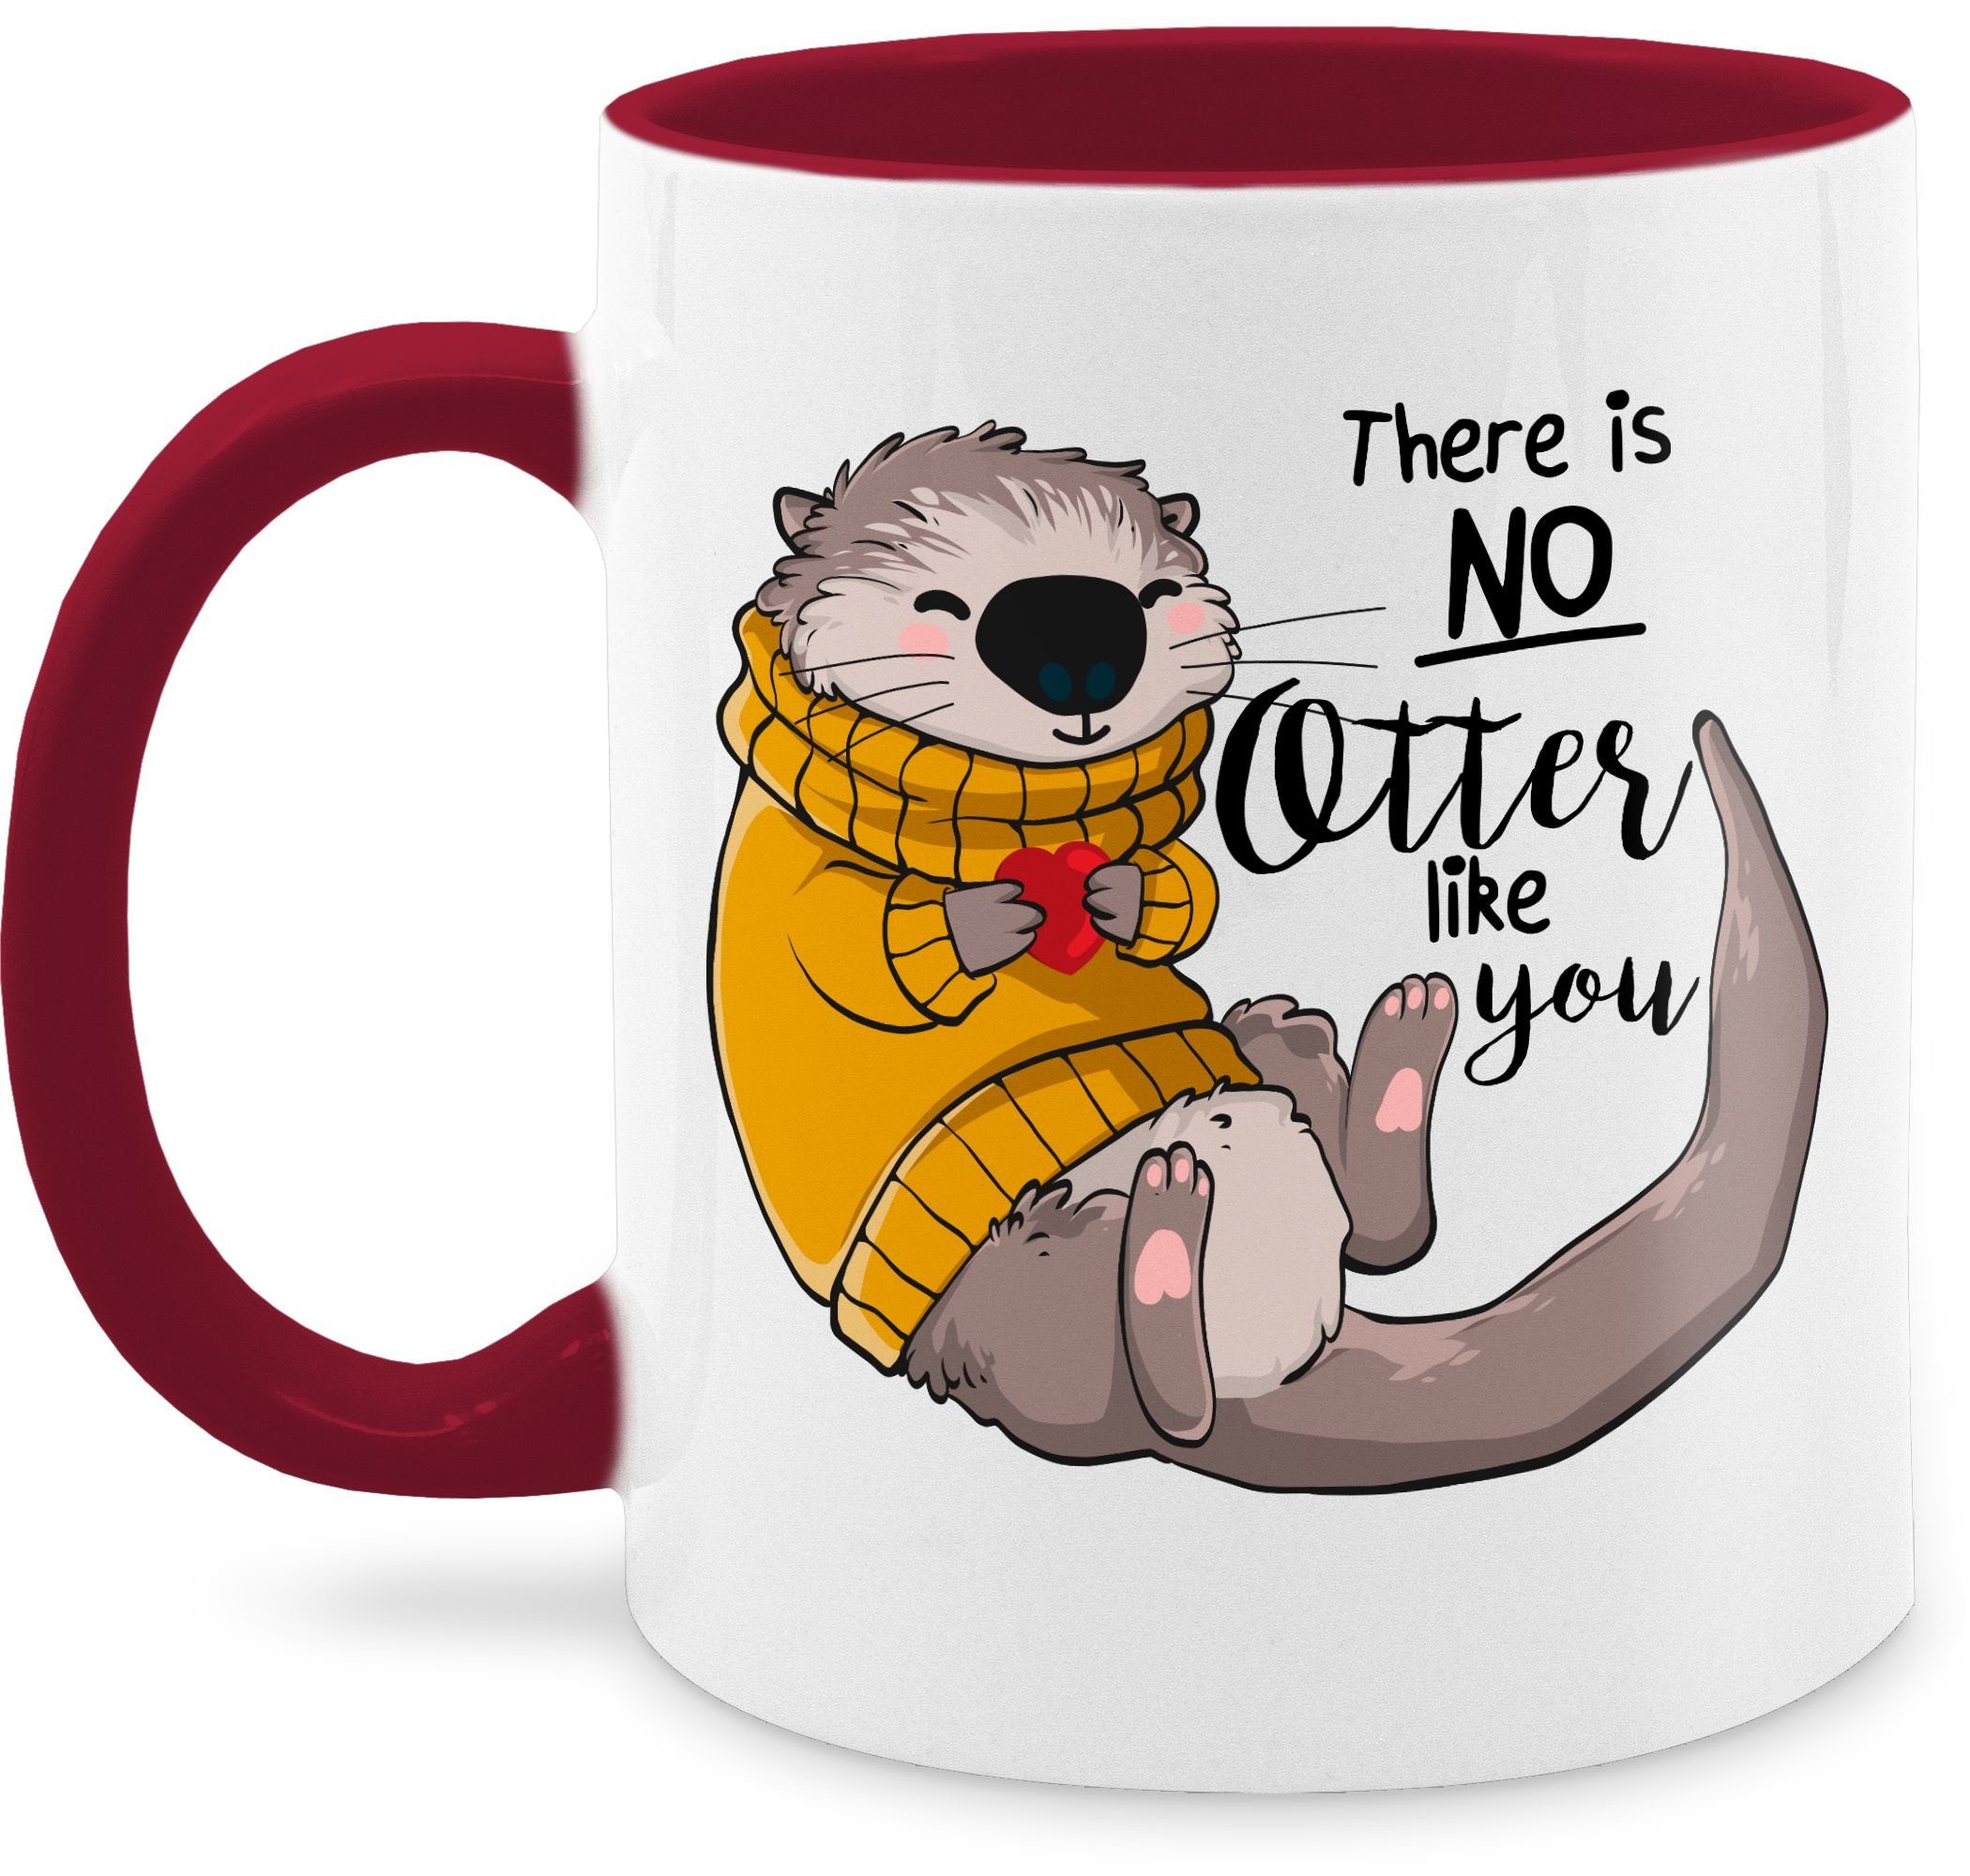 Shirtracer Tasse There is no Otter like you, Keramik, Statement Sprüche 1 Bordeauxrot